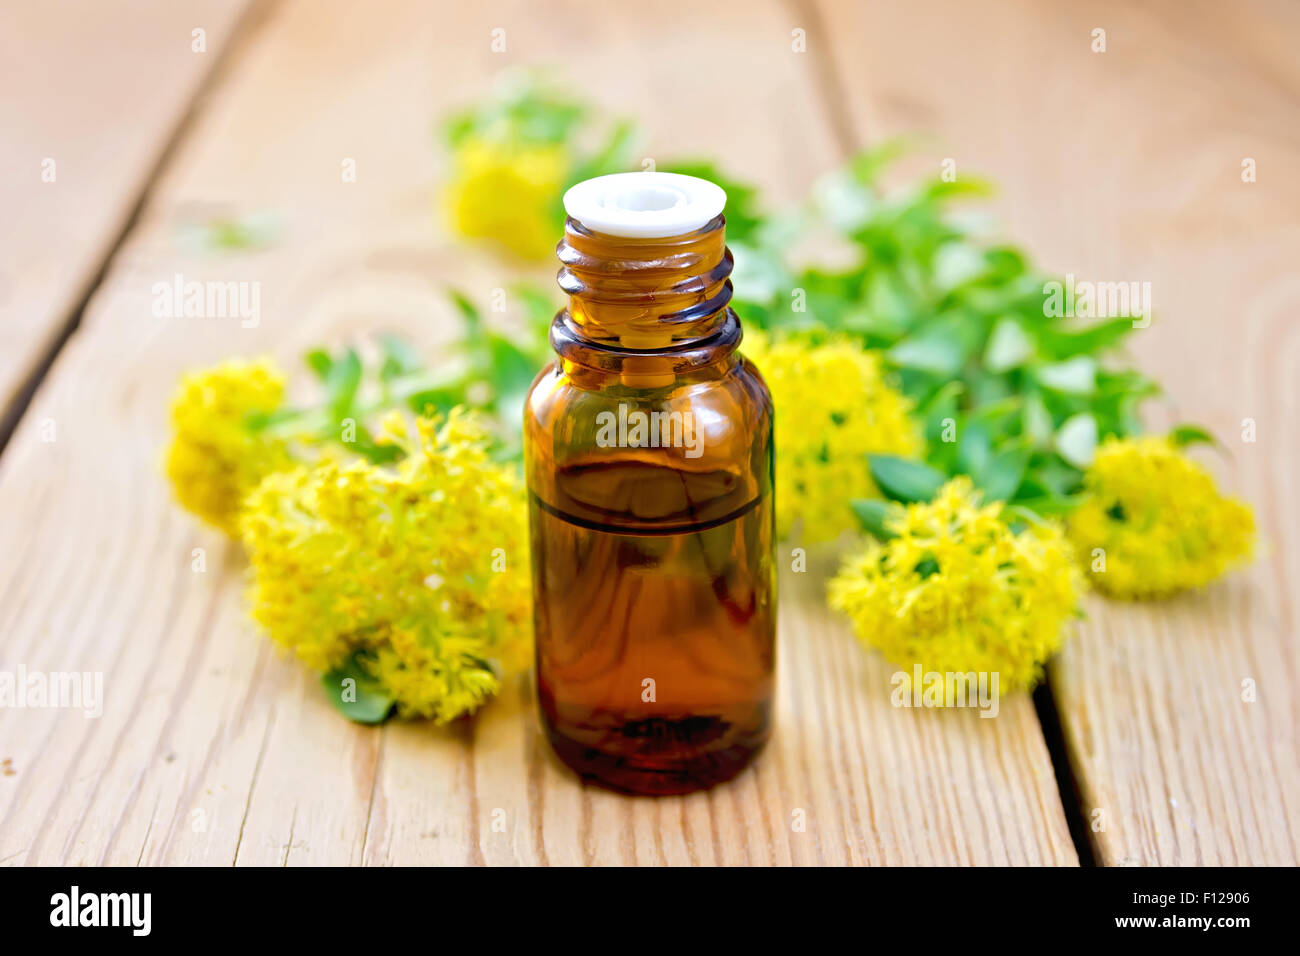 Oil with Rhodiola rosea on board Stock Photo